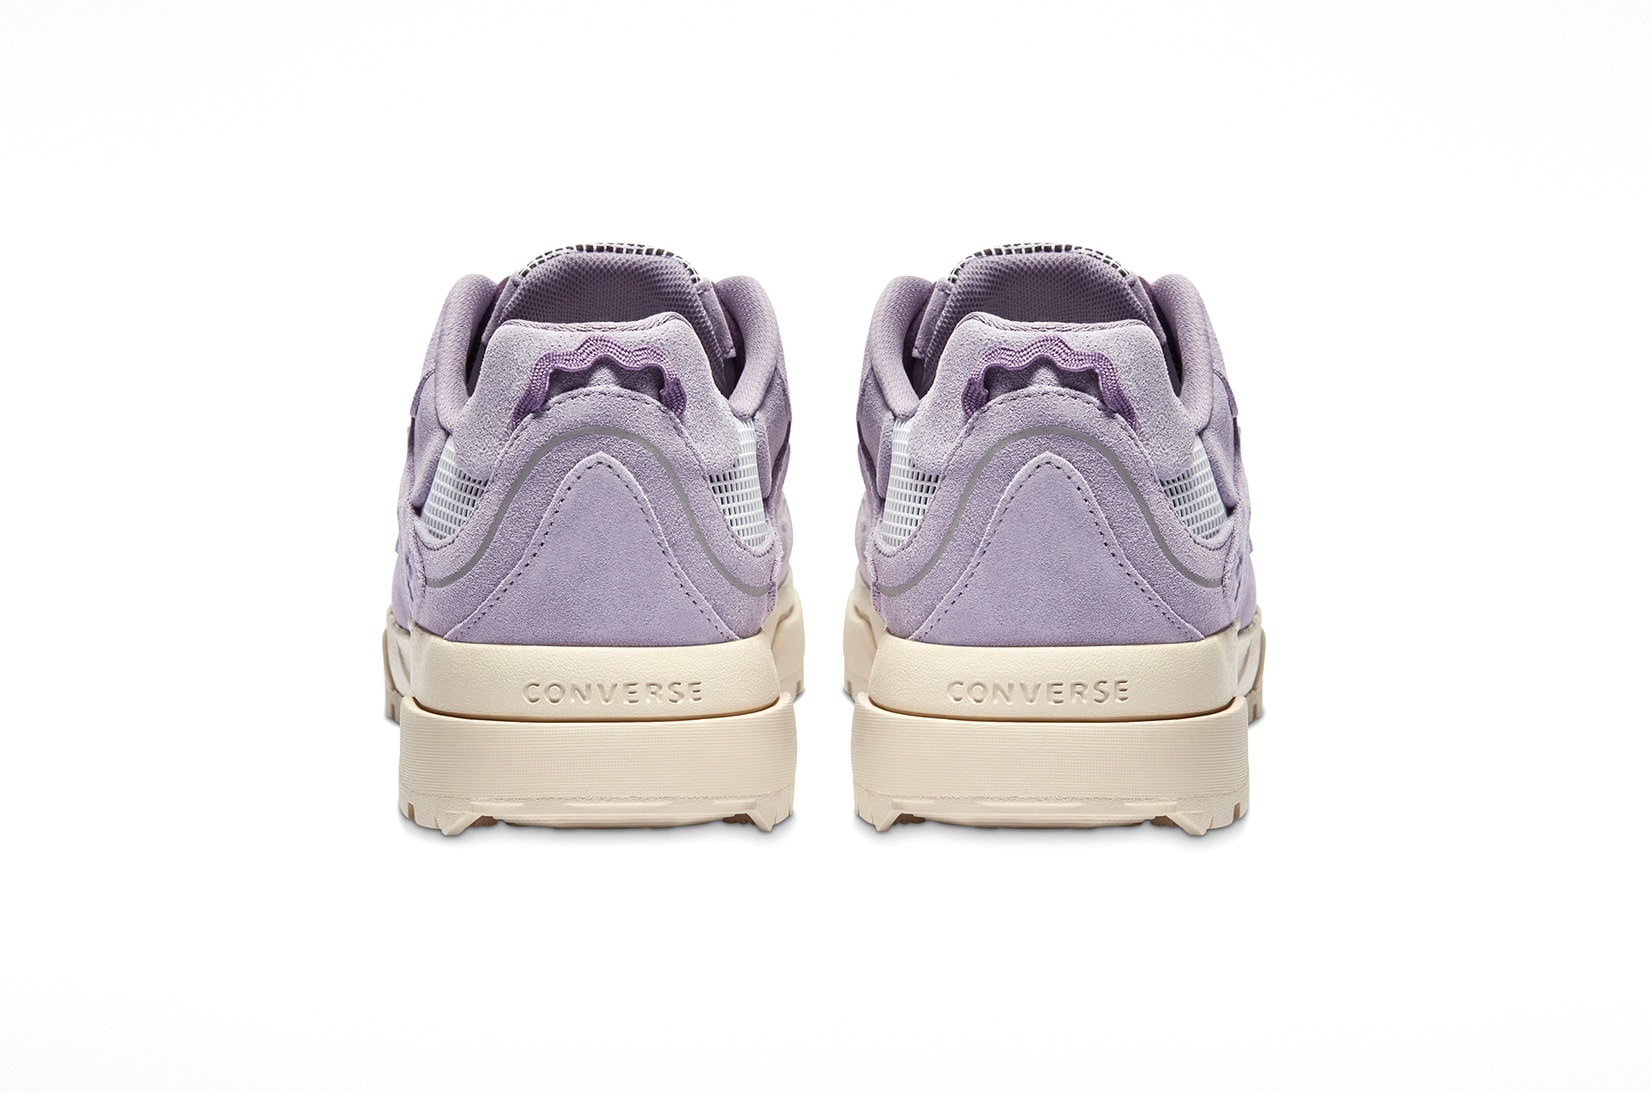 golf le fleur converse gianno ox tyler the creator suede lavender gray evergreen collaboration sneakers price release